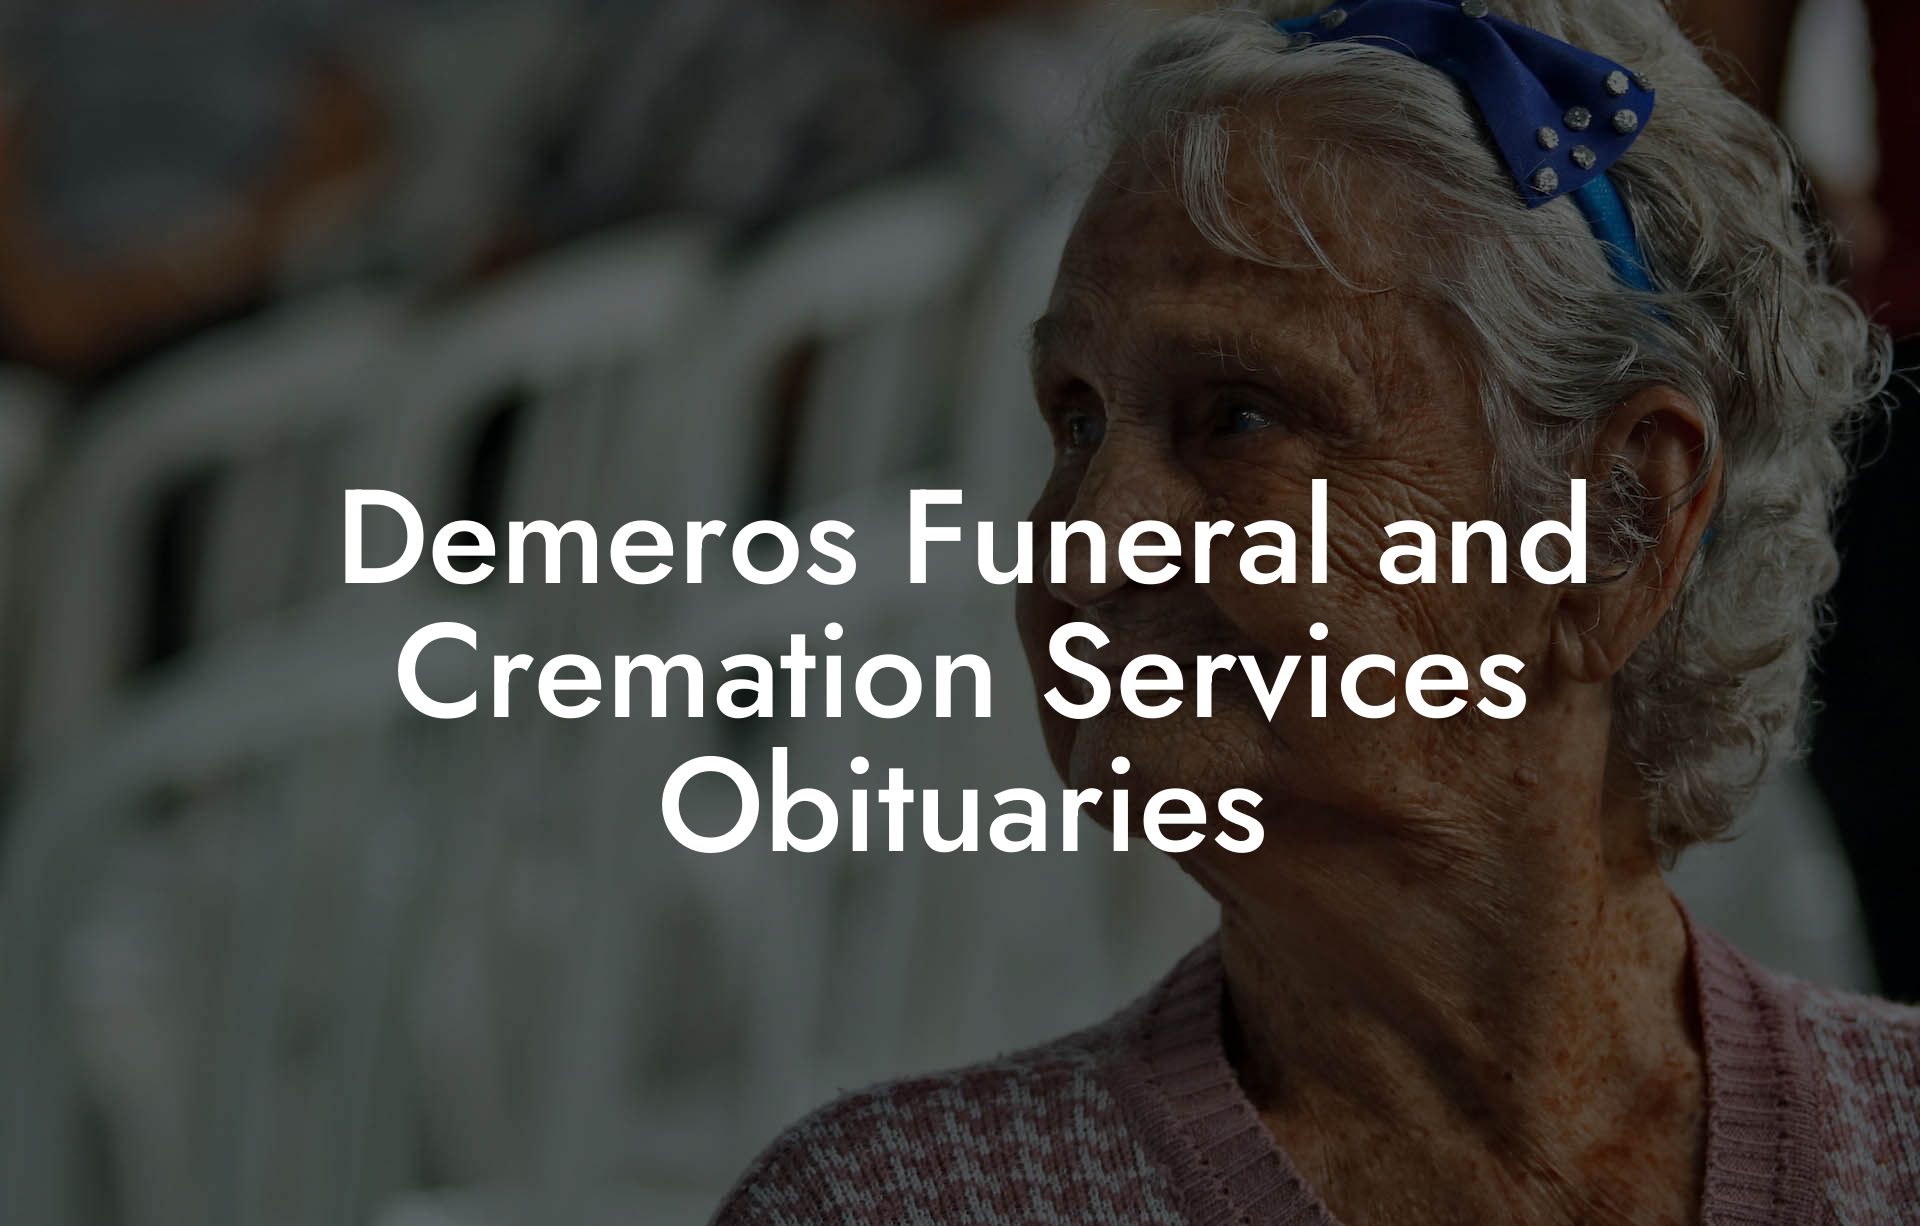 Demeros Funeral and Cremation Services Obituaries